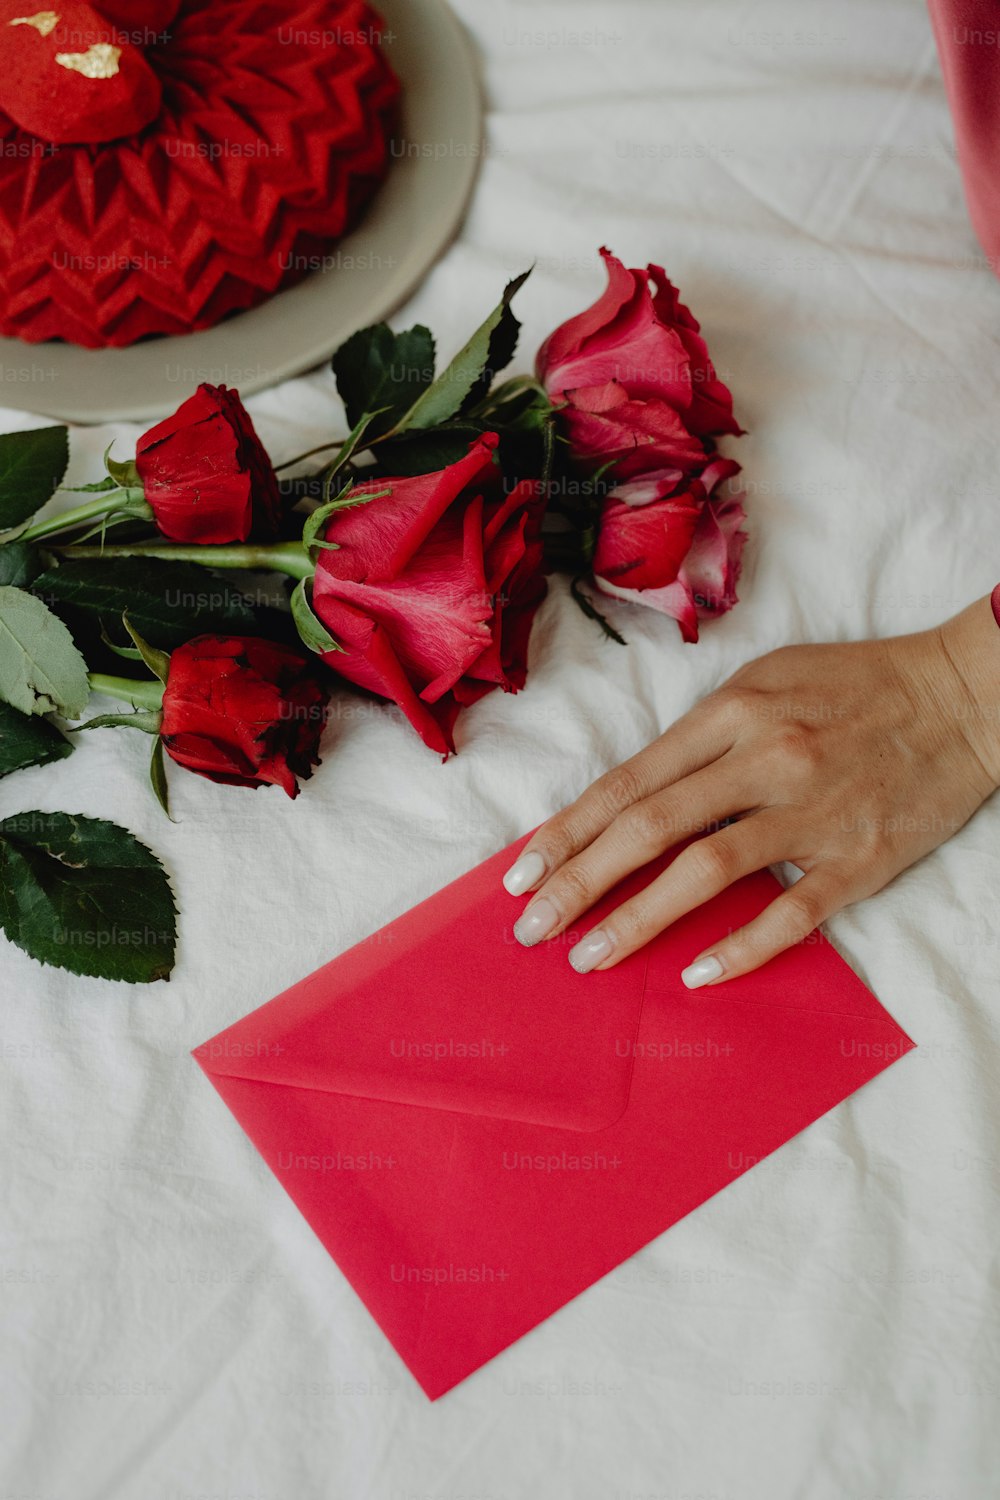 a woman's hand on a red envelope next to roses